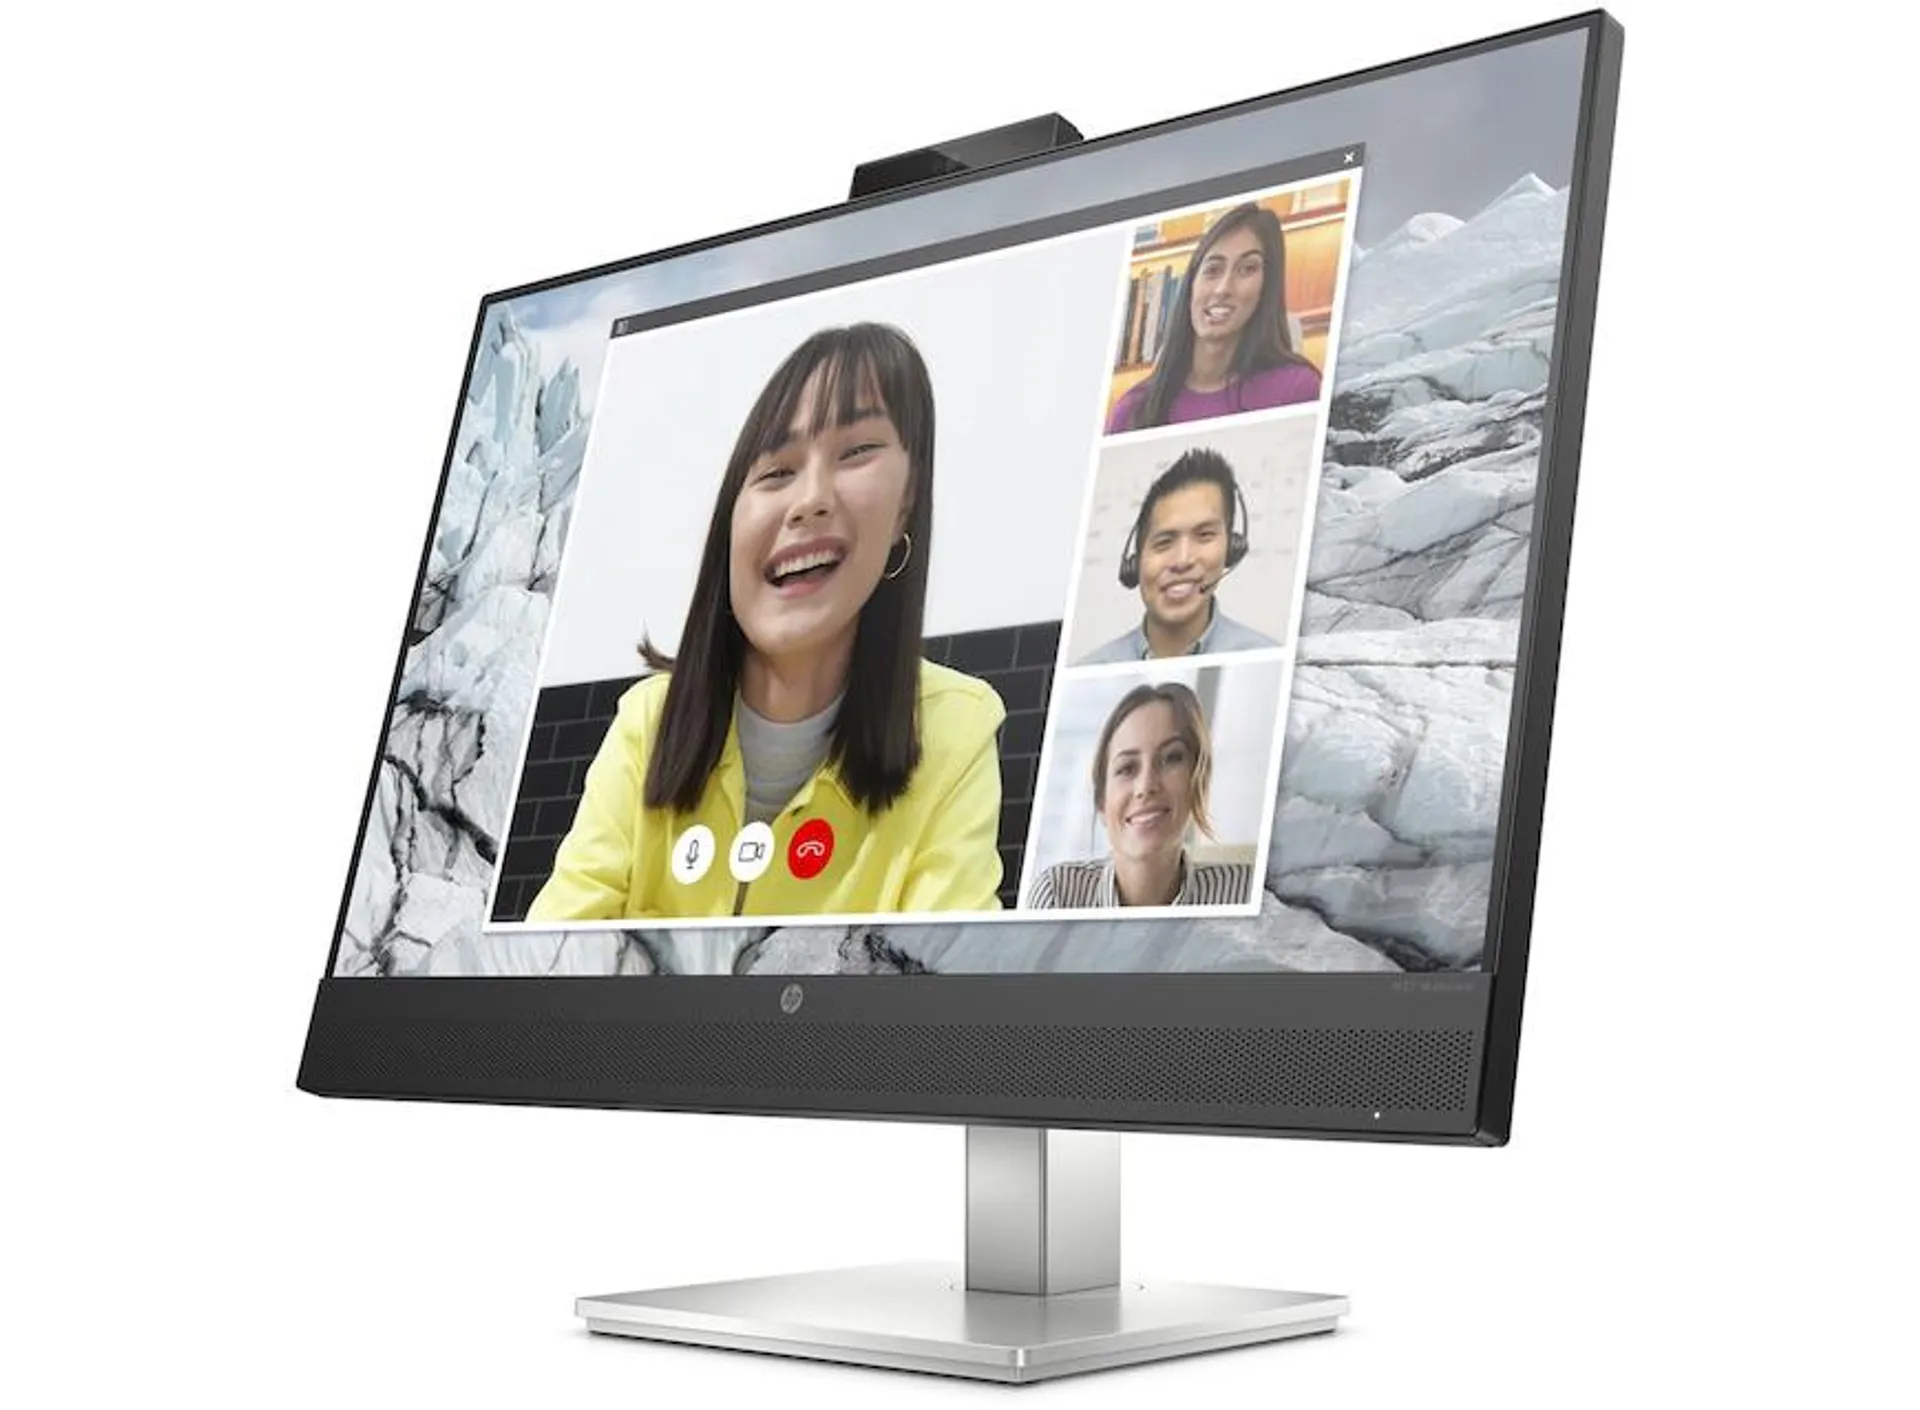 HP M27 (27”) FHD IPS USB-C Webcam Monitor with Audio